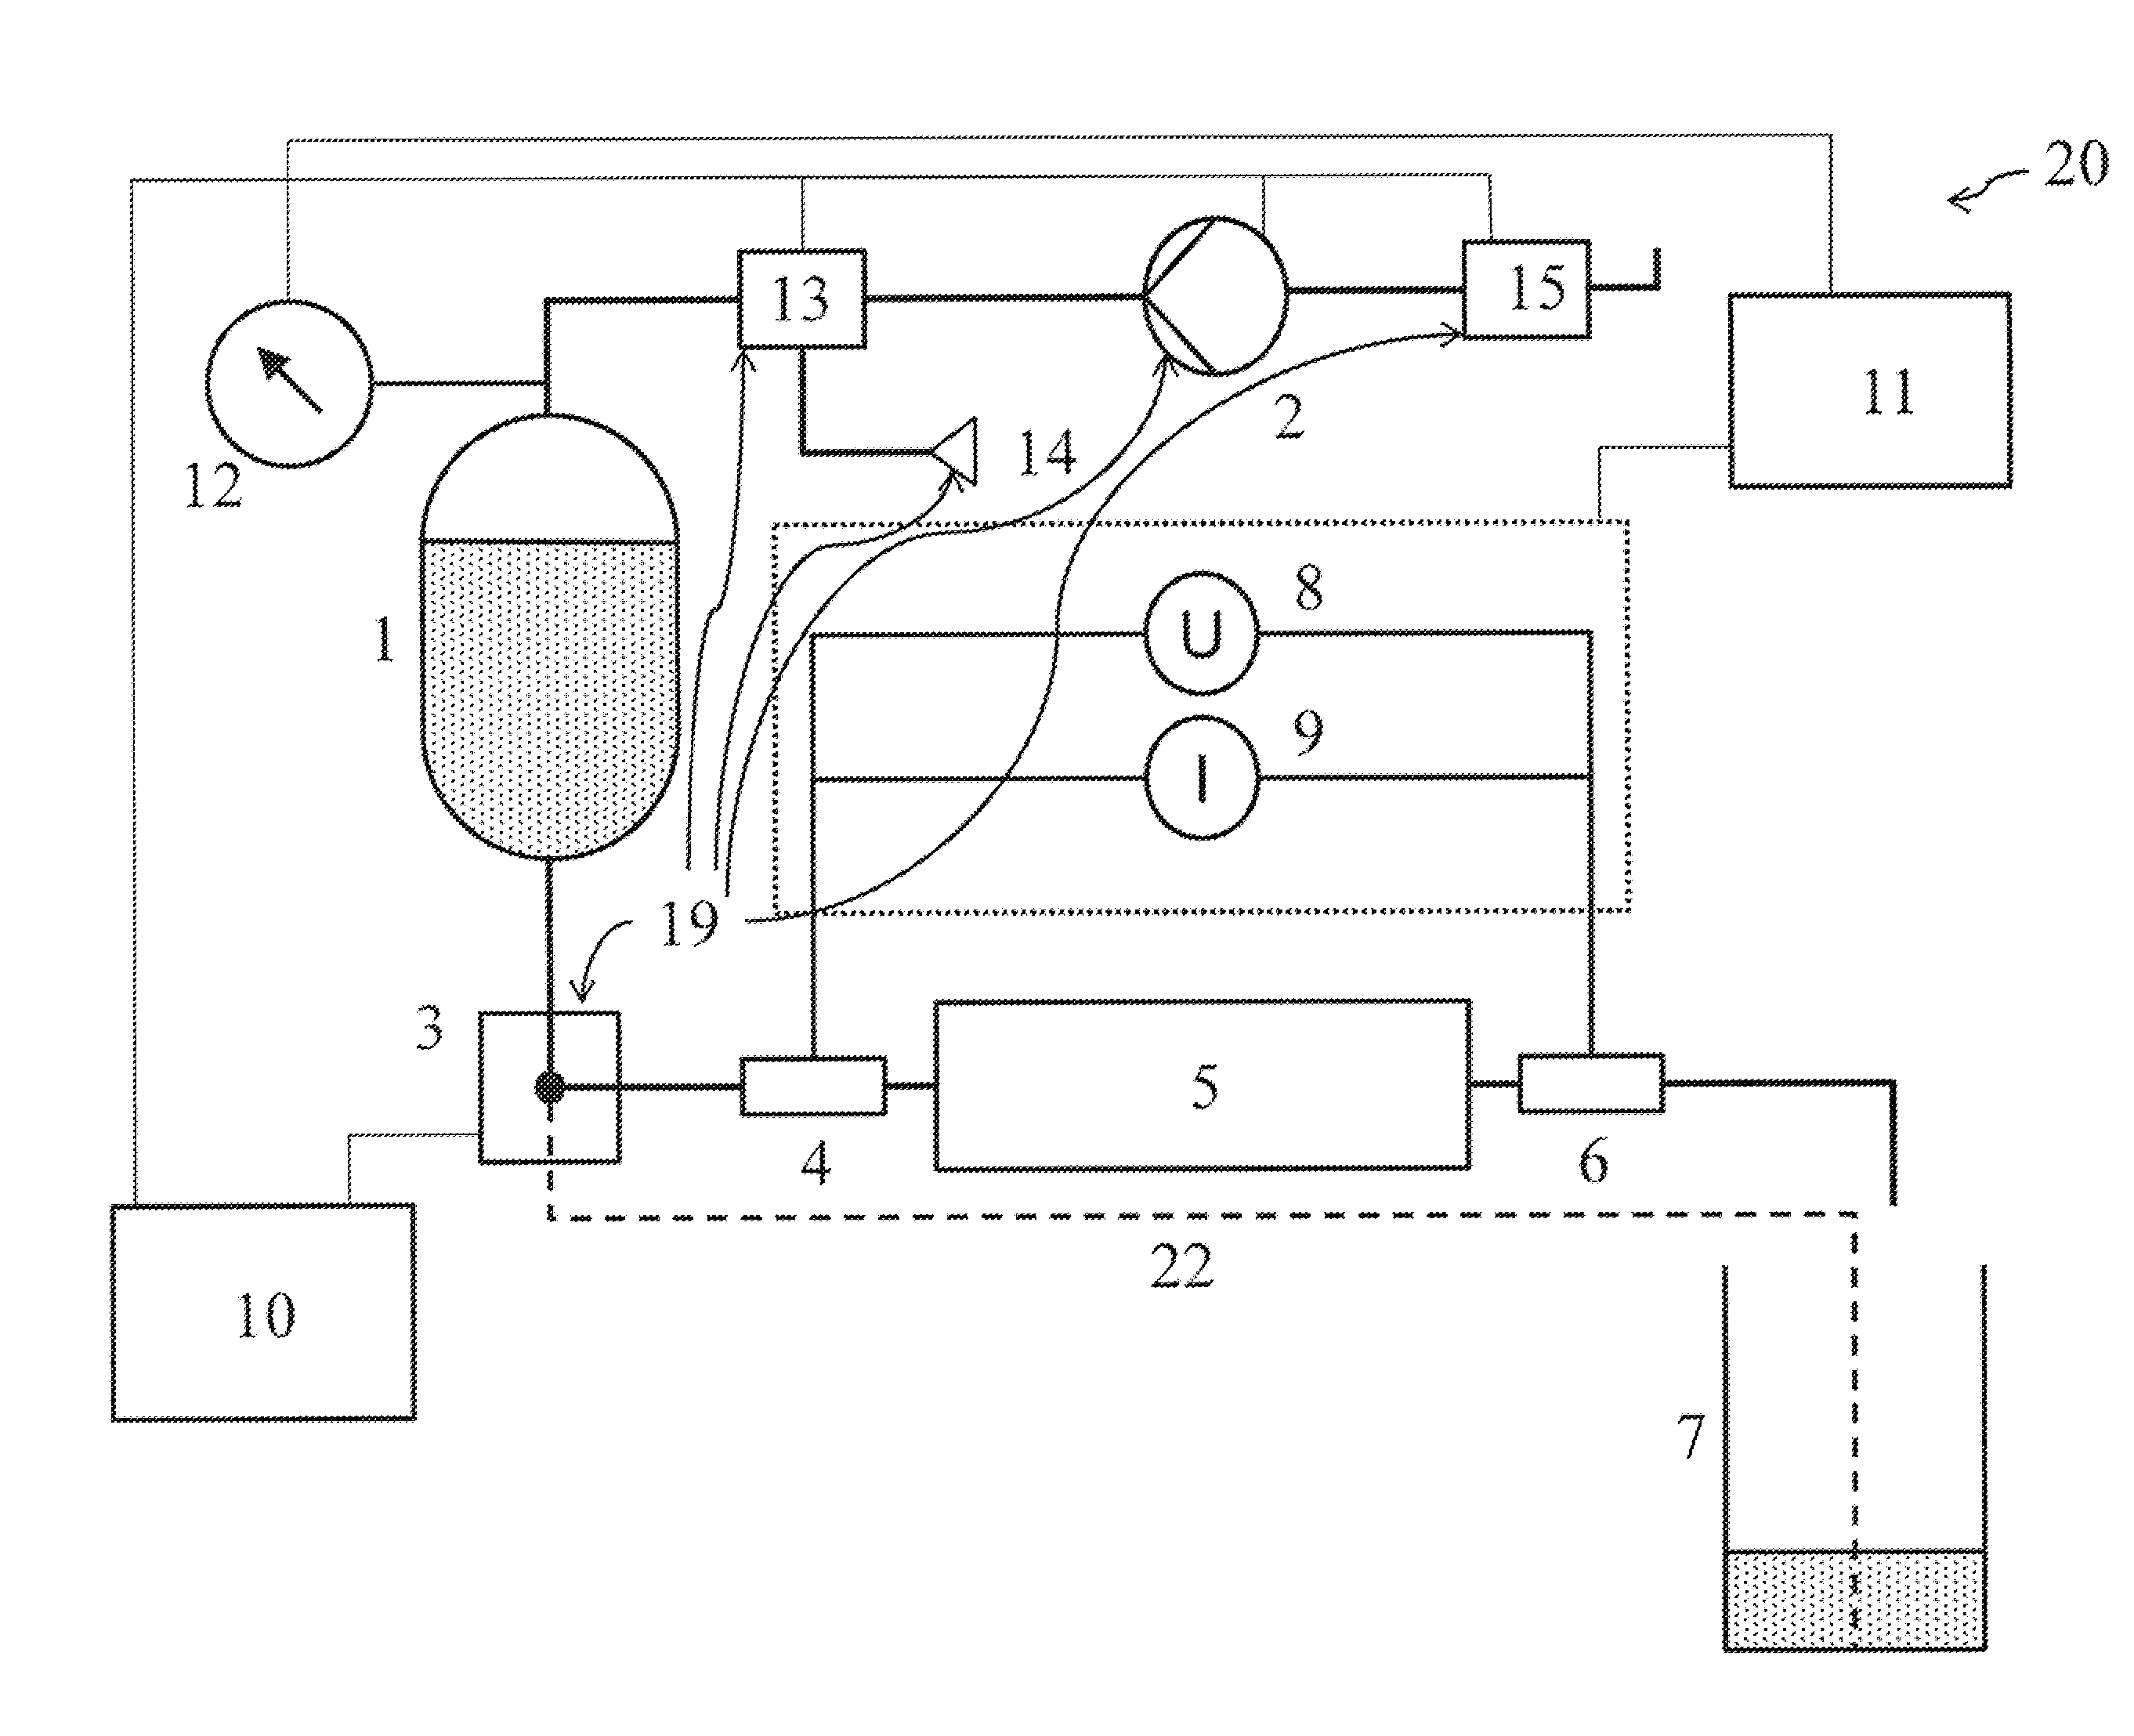 System for Determining the Zeta Potential for Characterizing a Solid/Liquid Interface With Controlled Profile Pressure Loading